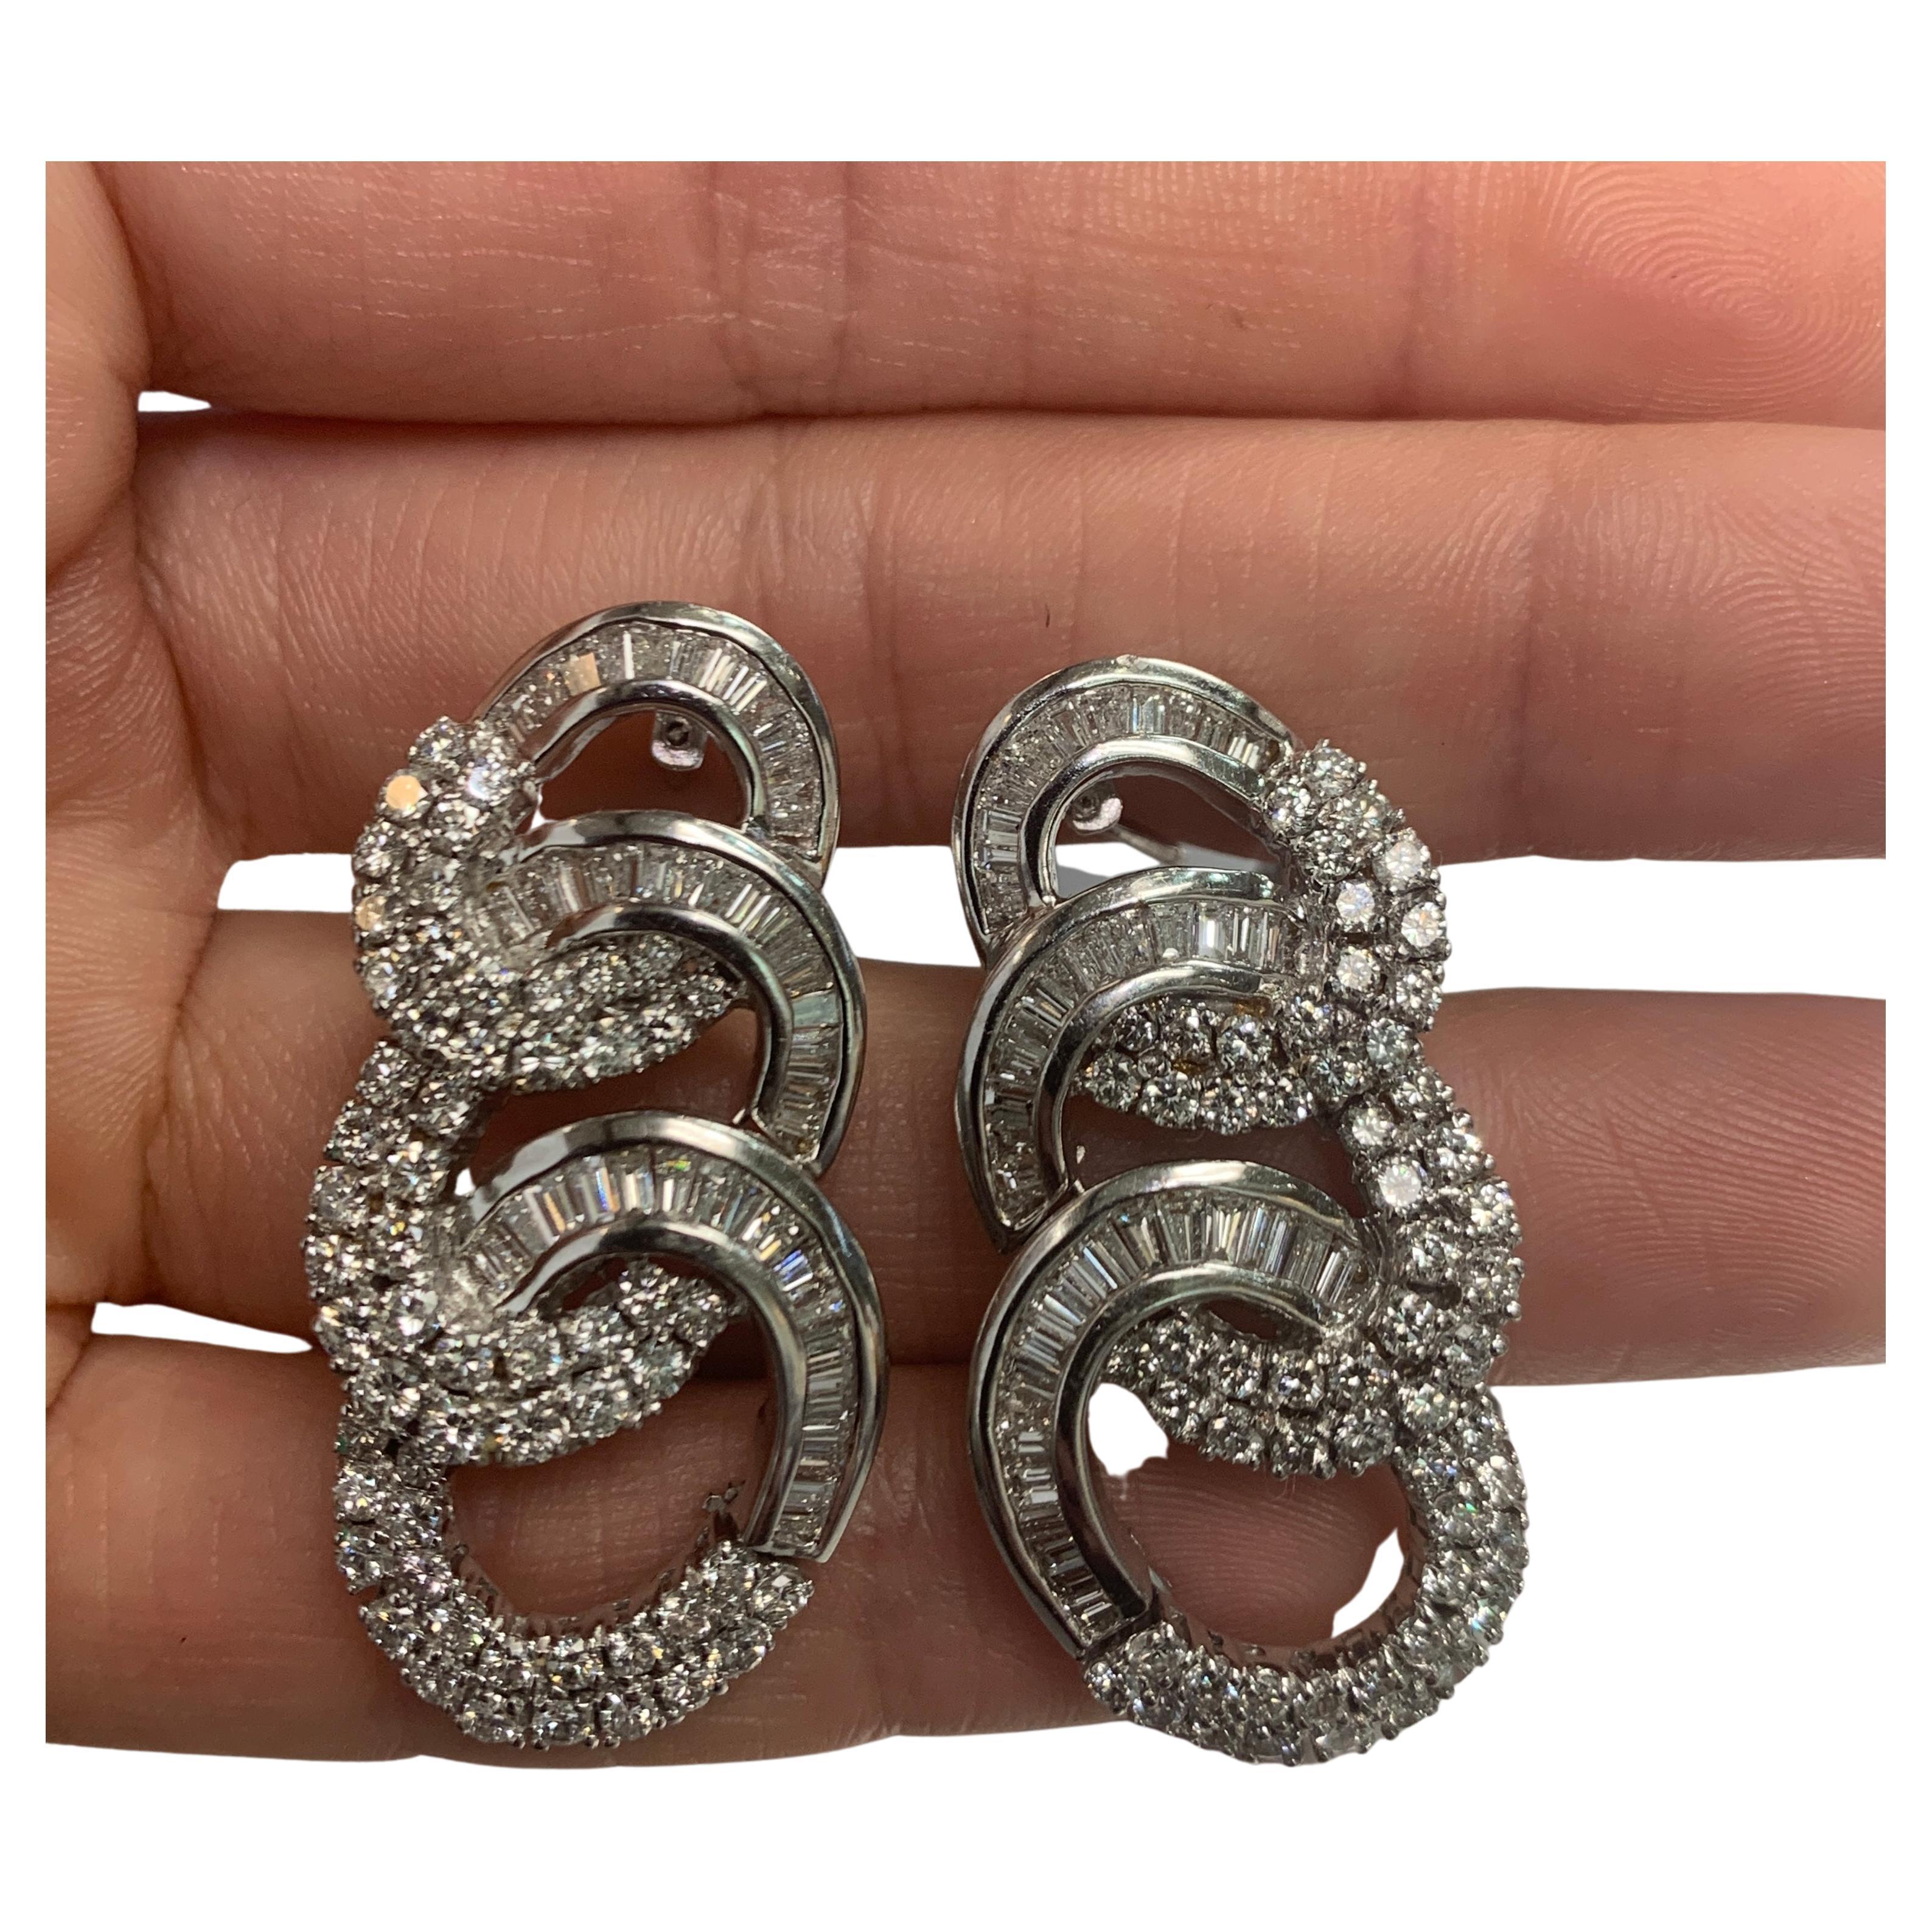 Three Hoop Diamond Earrings

Diamond Weight: approximately 7.00 cts 

Three graduated attached hoops consisting of round & baguette cut diamonds set in 18k white gold 

Back Type: clip on with post 

Measurements: 1.25